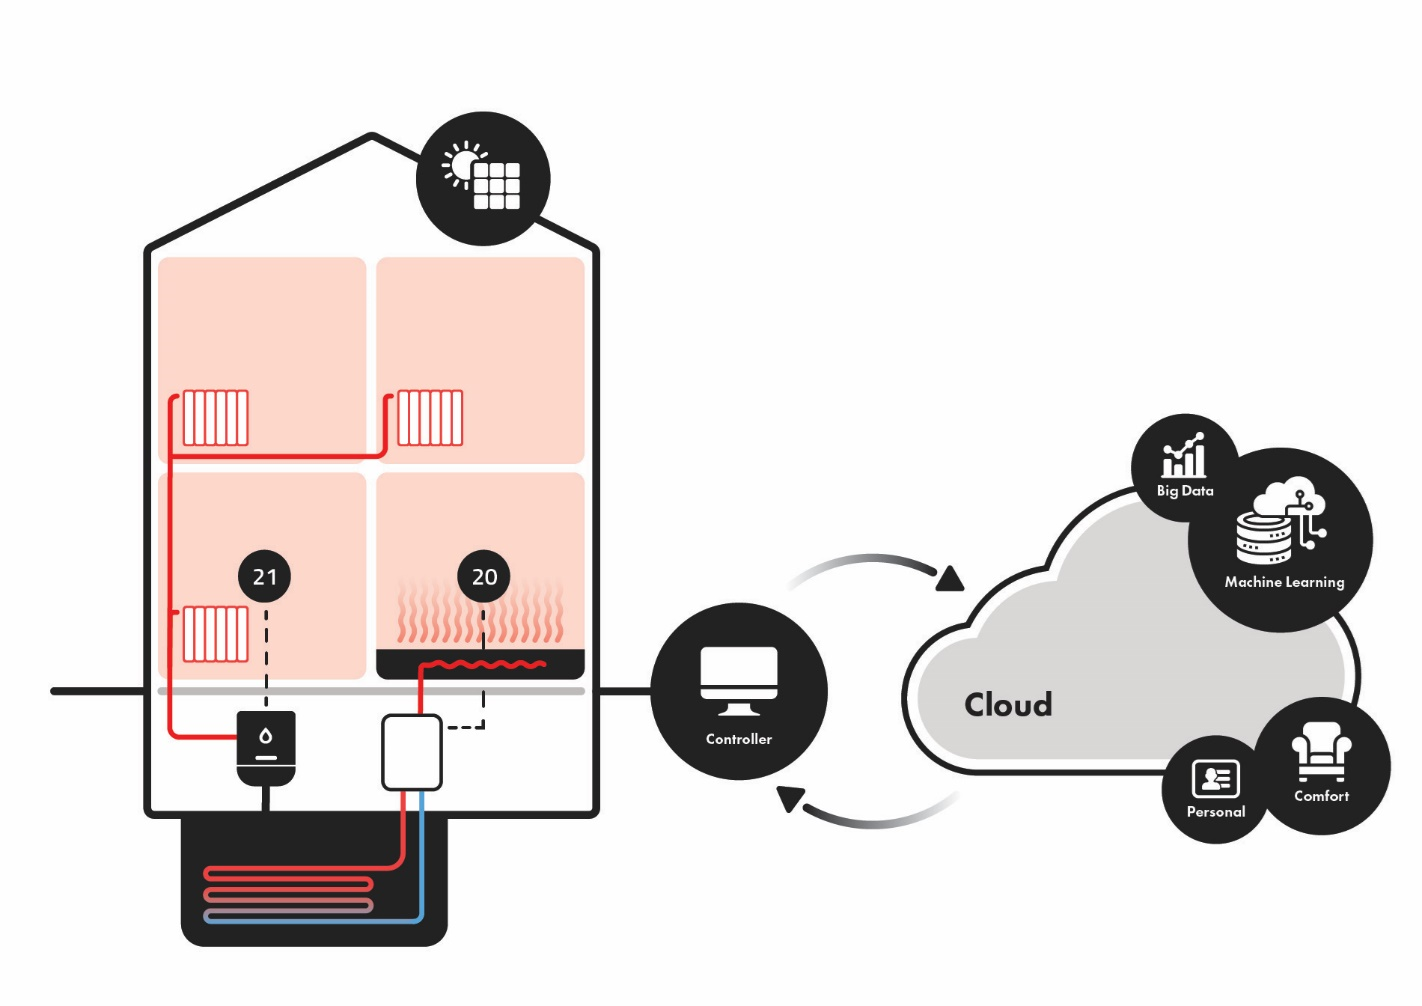 Schema of the application of the heat pump controller, it connects a heating system of a house with the cloud and machine learning.